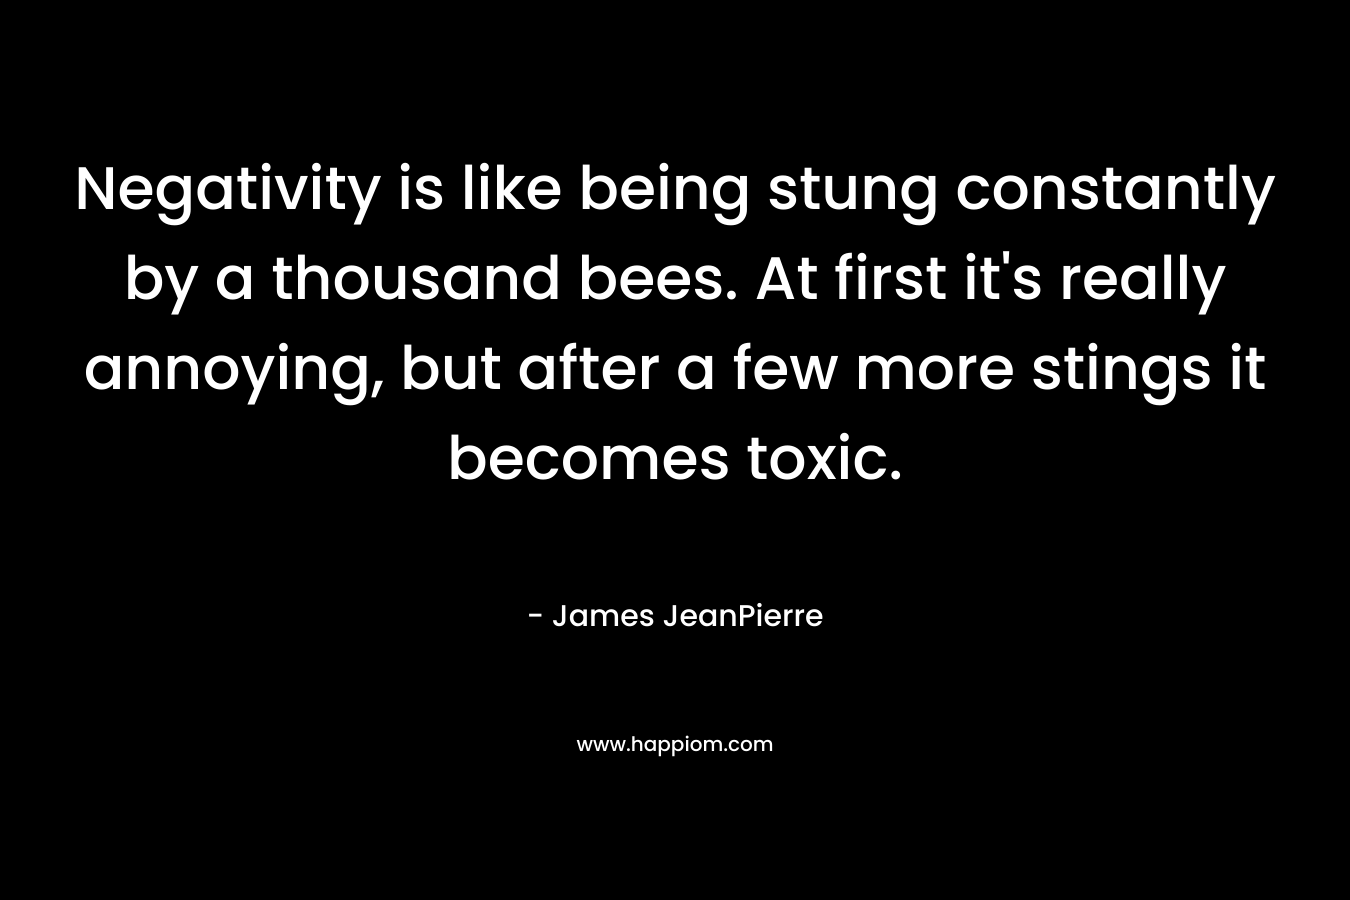 Negativity is like being stung constantly by a thousand bees. At first it's really annoying, but after a few more stings it becomes toxic.